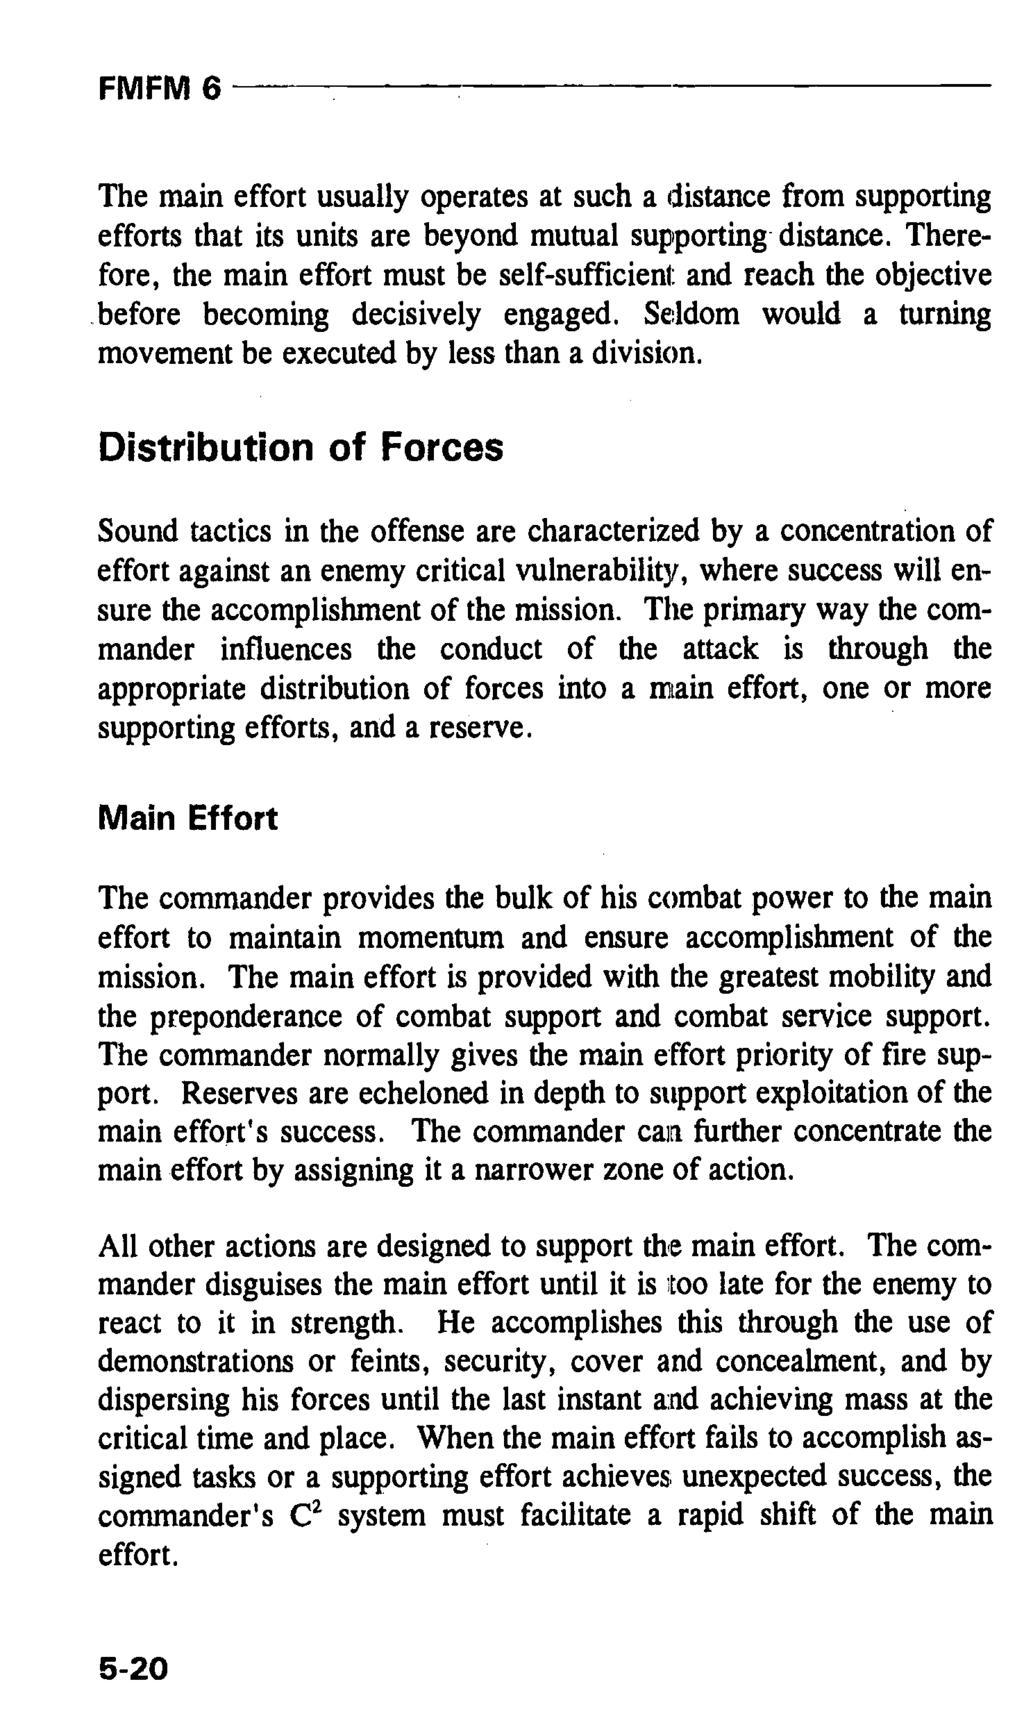 FMFM6 The main effort usually operates at such a distance from supporting efforts that its units are beyond mutual supporting distance.